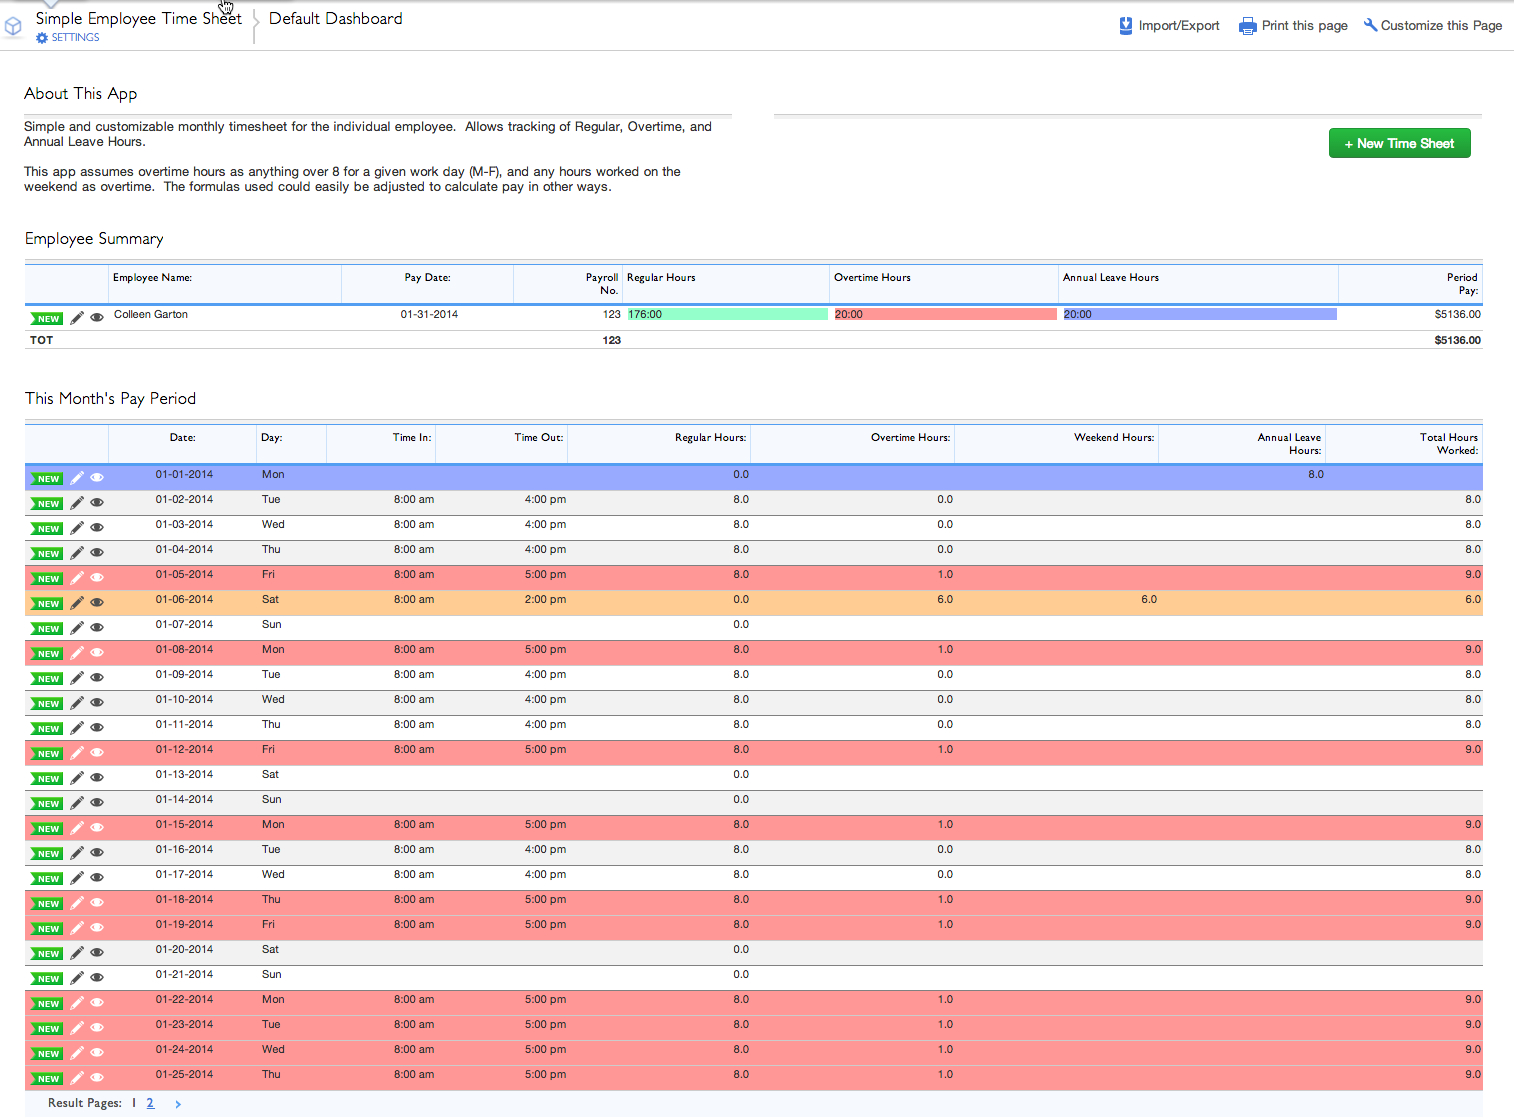 Employee Overtime Tracking Spreadsheet Throughout Simple Employee Time Sheet Quick Base Timesheet1 Overtime Tracking